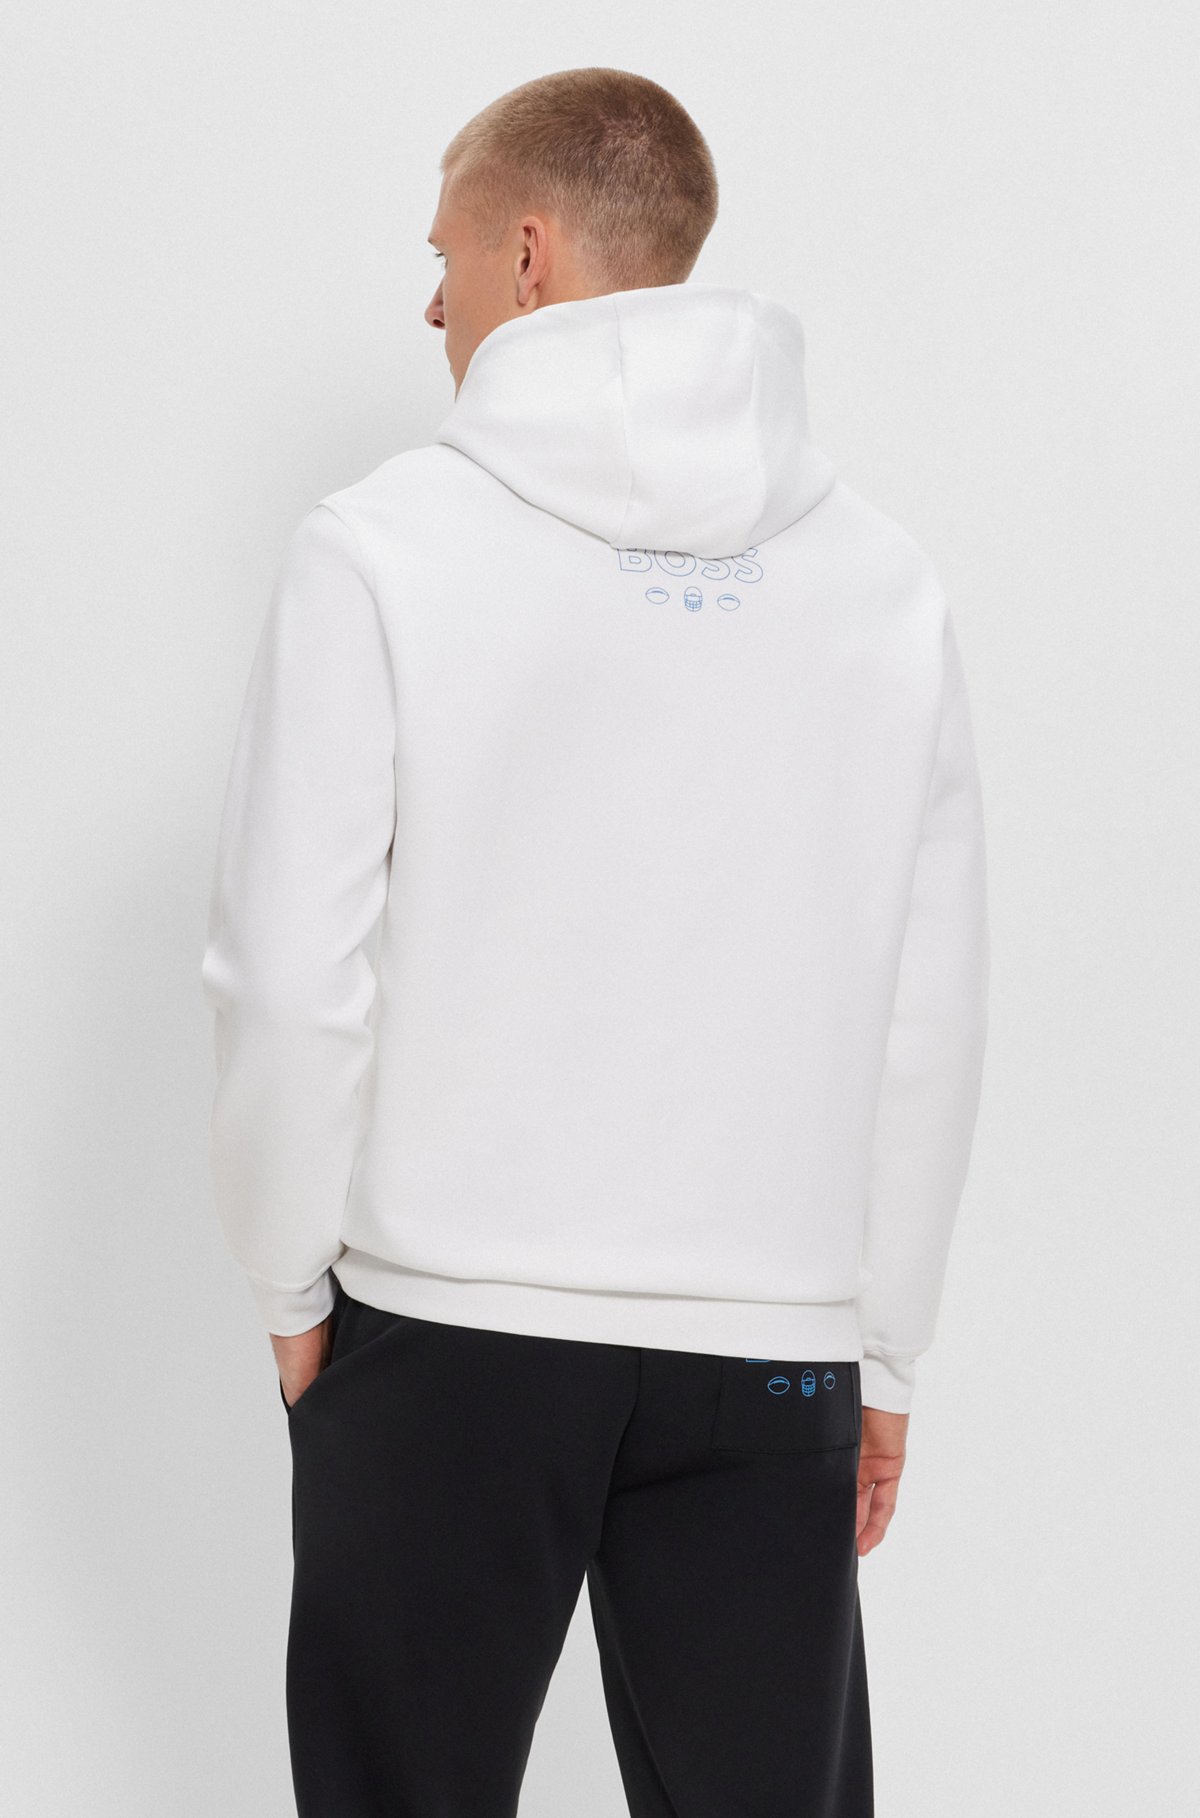  BOSS x NFL cotton-blend hoodie with collaborative branding, Chargers